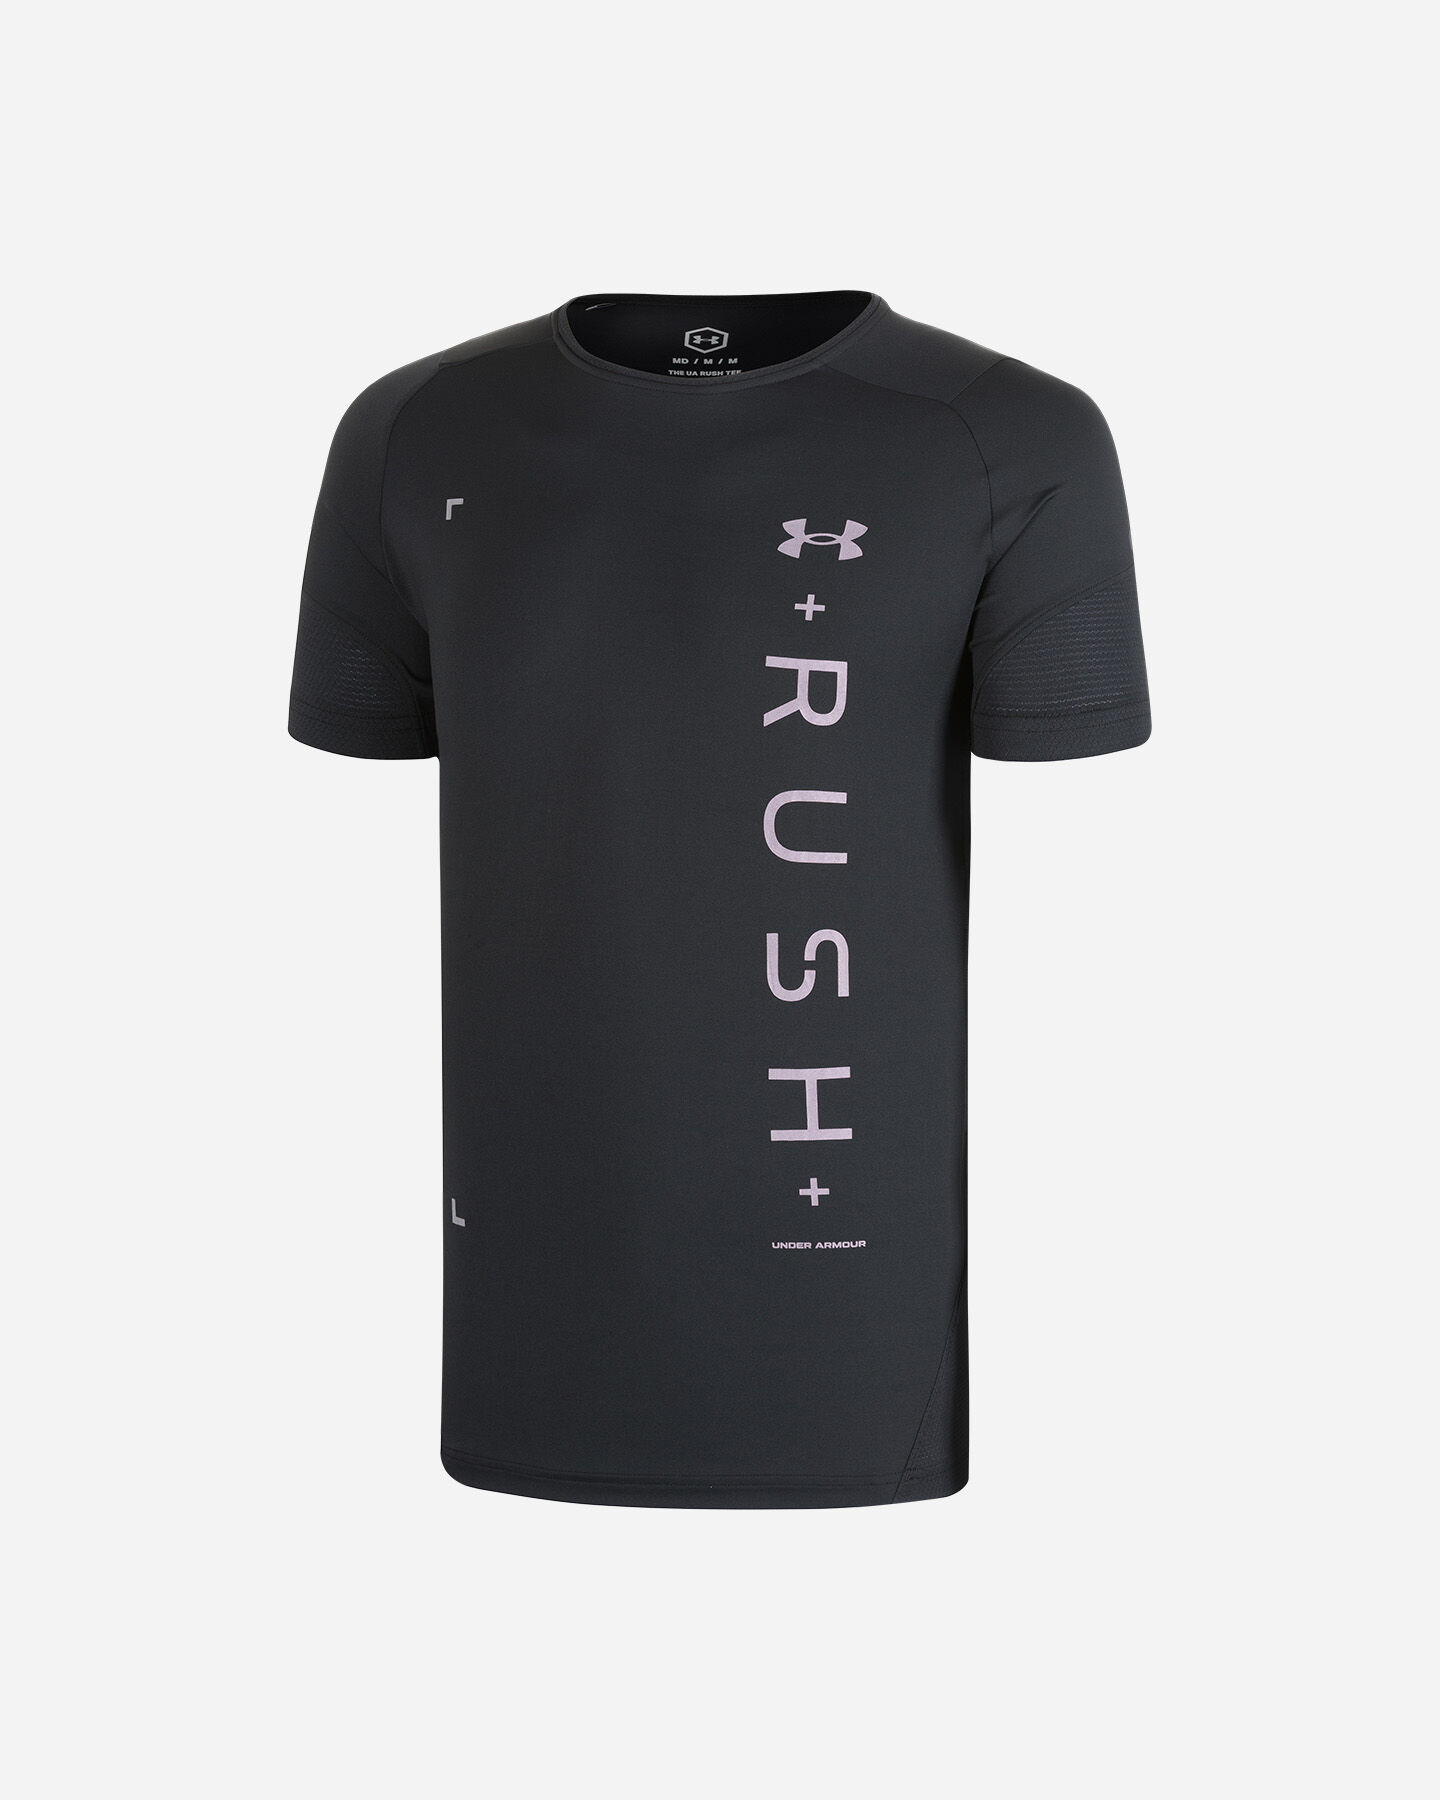  T-Shirt training UNDER ARMOUR RUSH 2.0 GRAPHIC M S5230015|0001|SM scatto 0